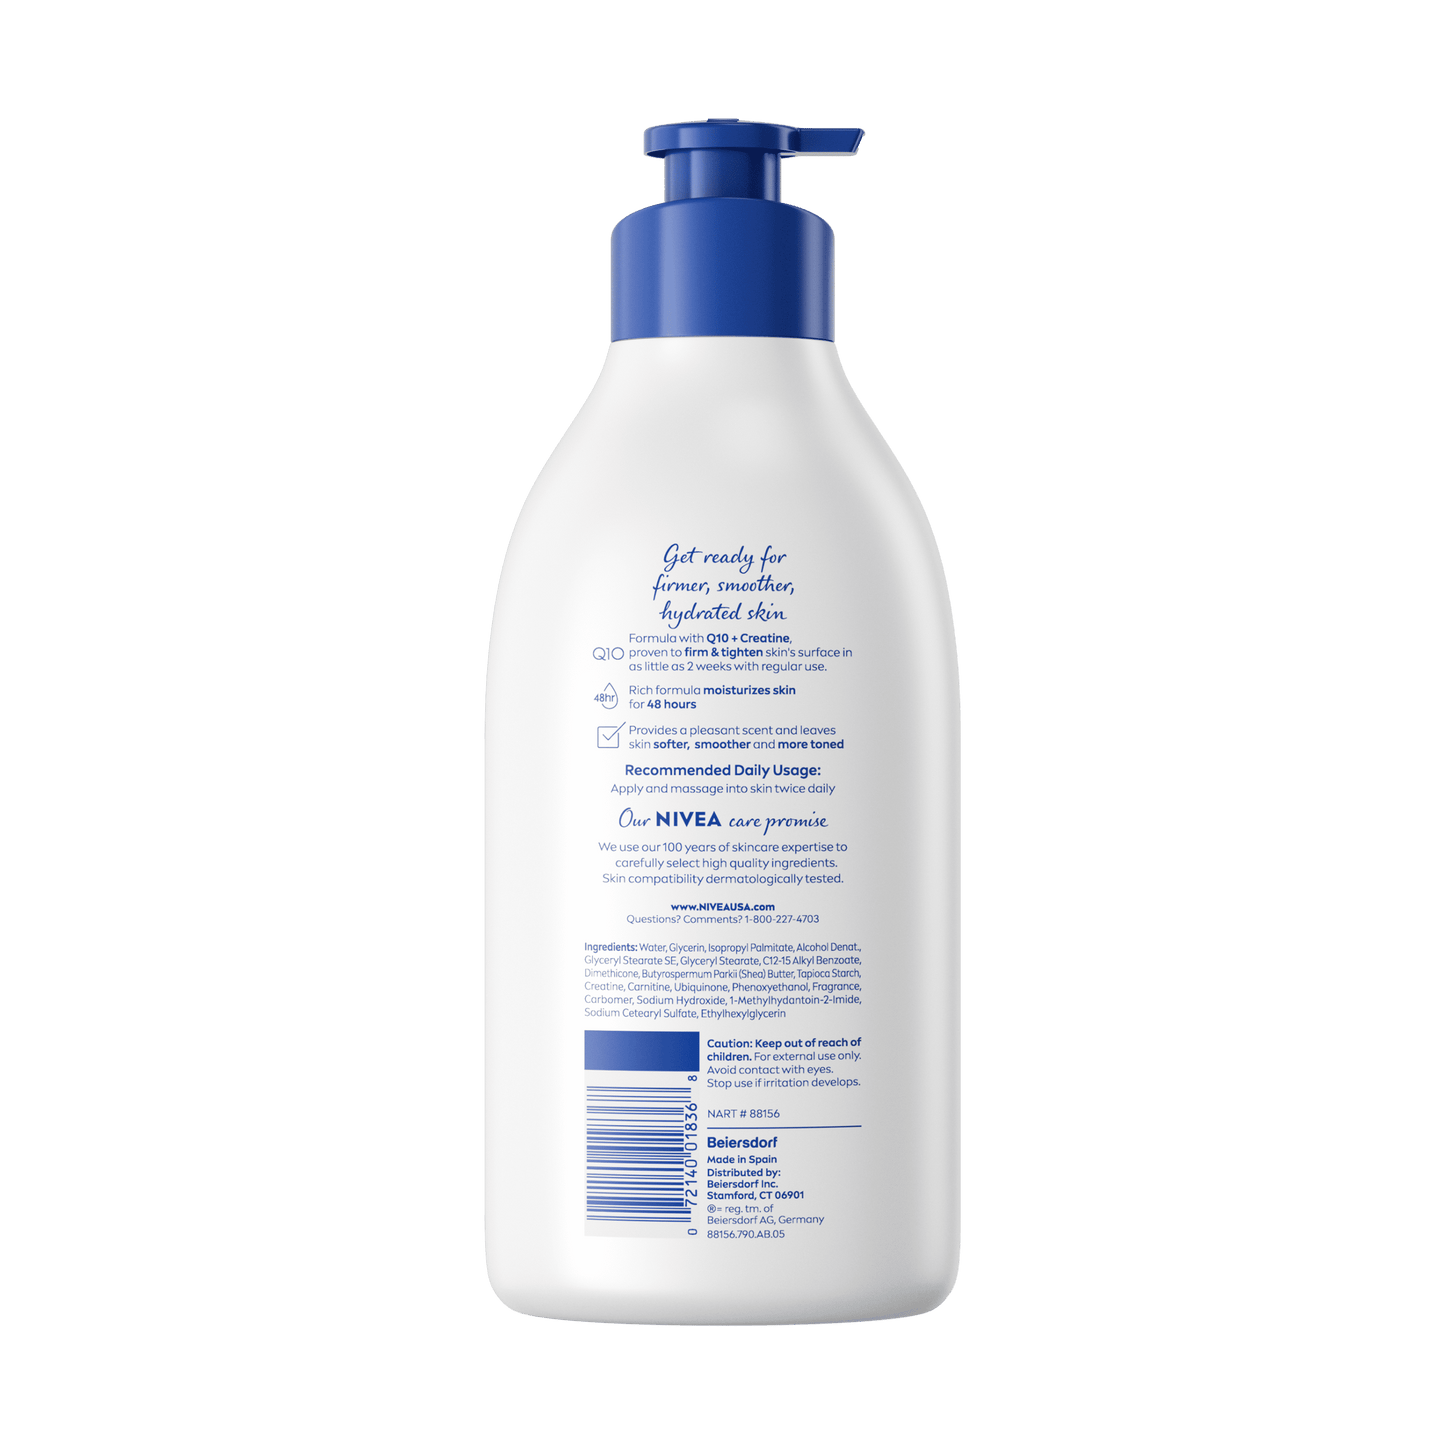 NIVEA Skin Firming Hydration Body Lotion with Q10 and Shea Butter, 33.8 Fl Oz Pump Bottle